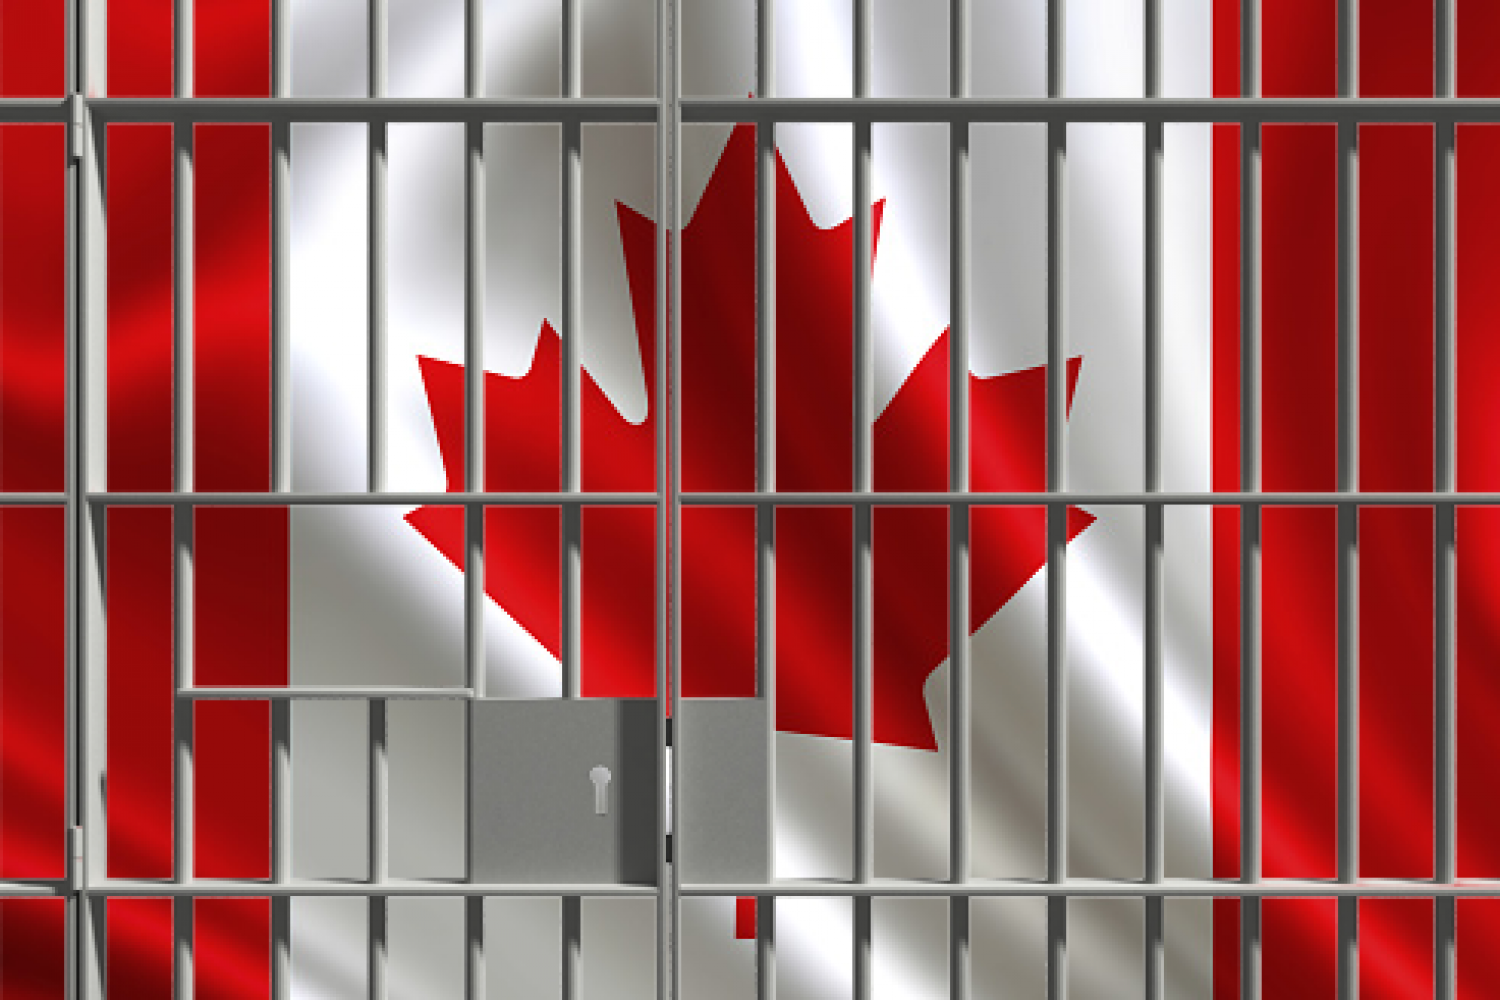 6 Million Canadians Detained In Largest Prison In the World